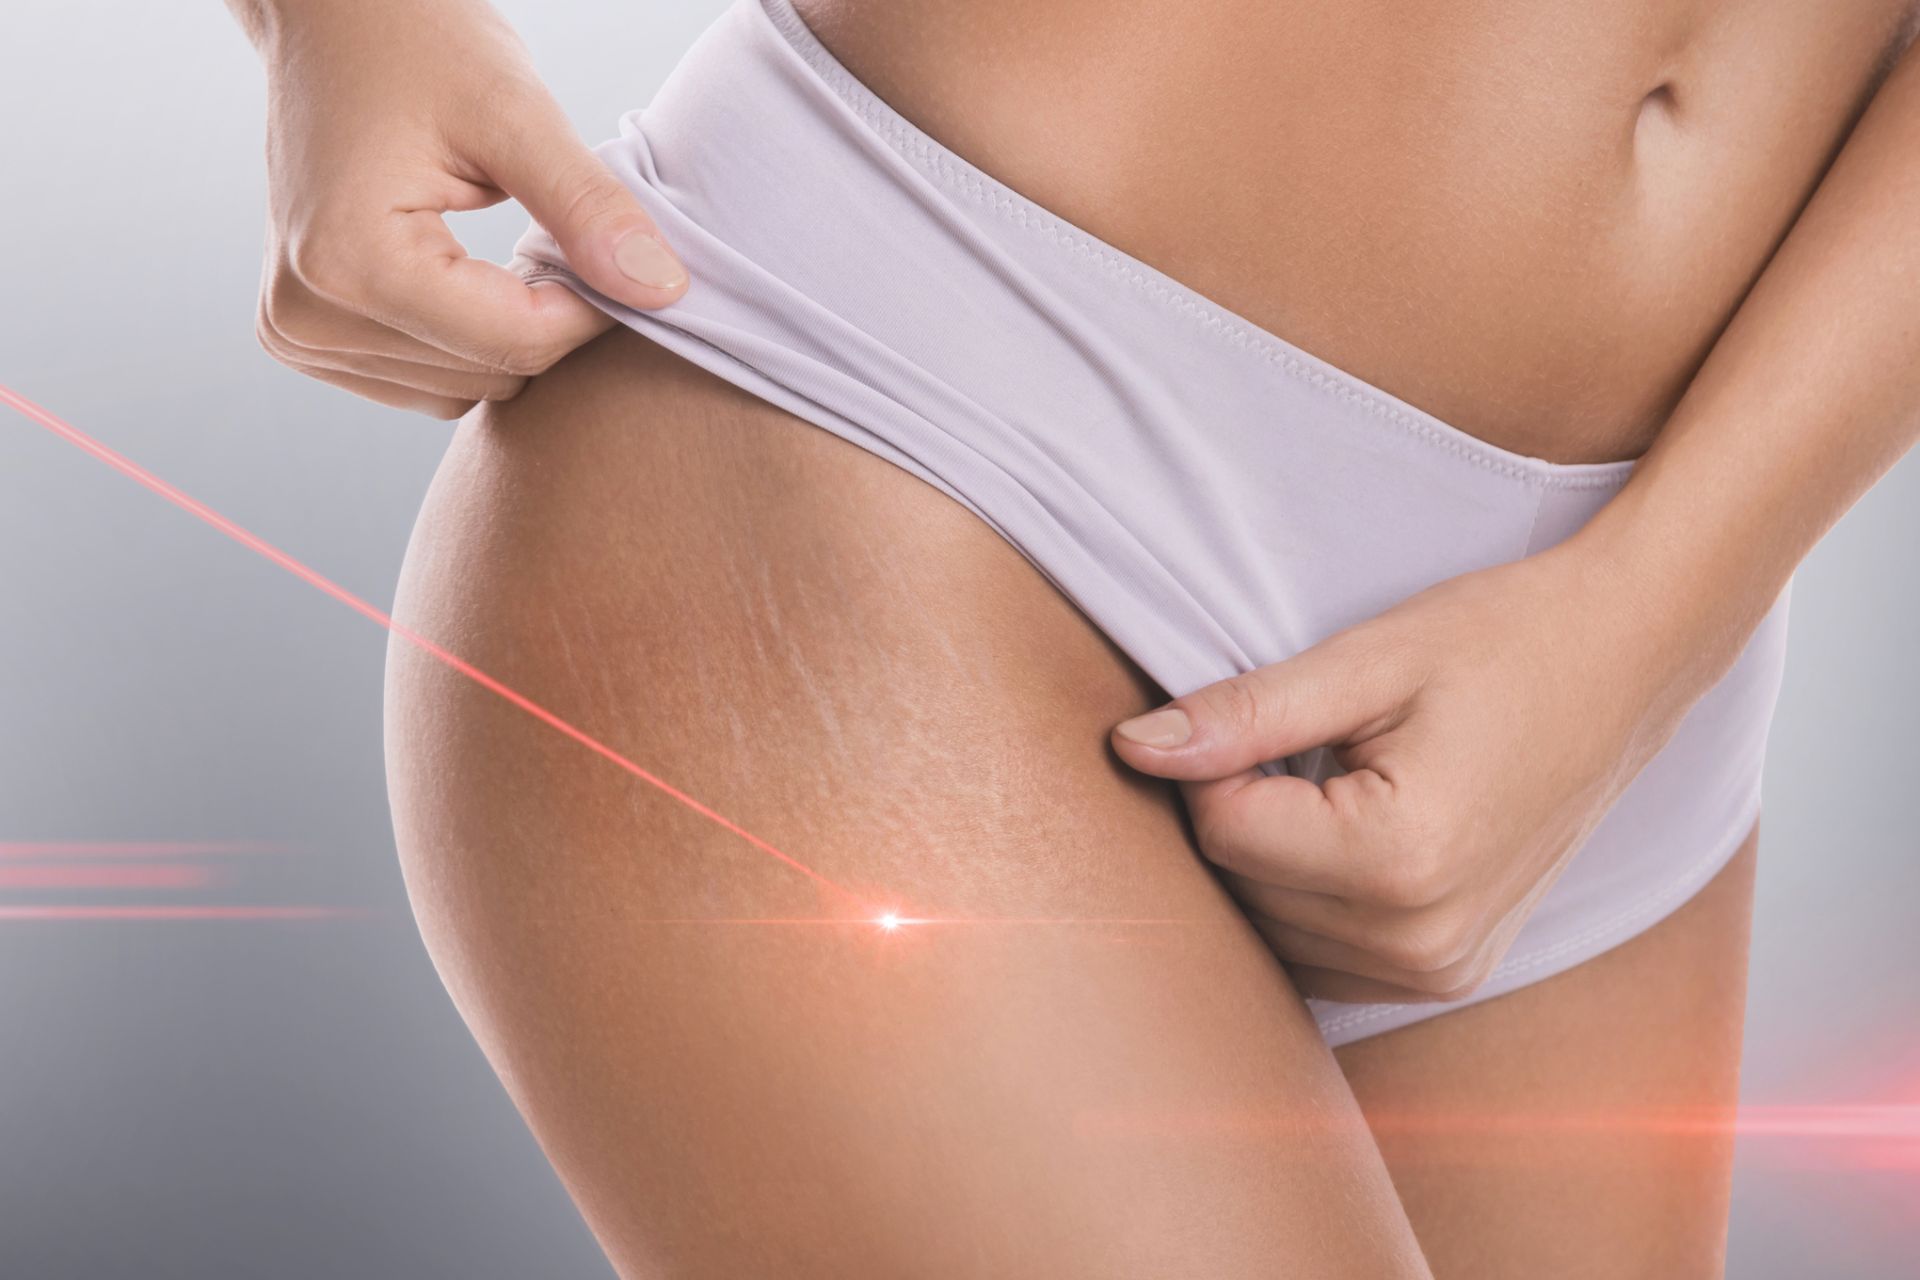 laser beam focused on stretch marks on a woman's upper thigh